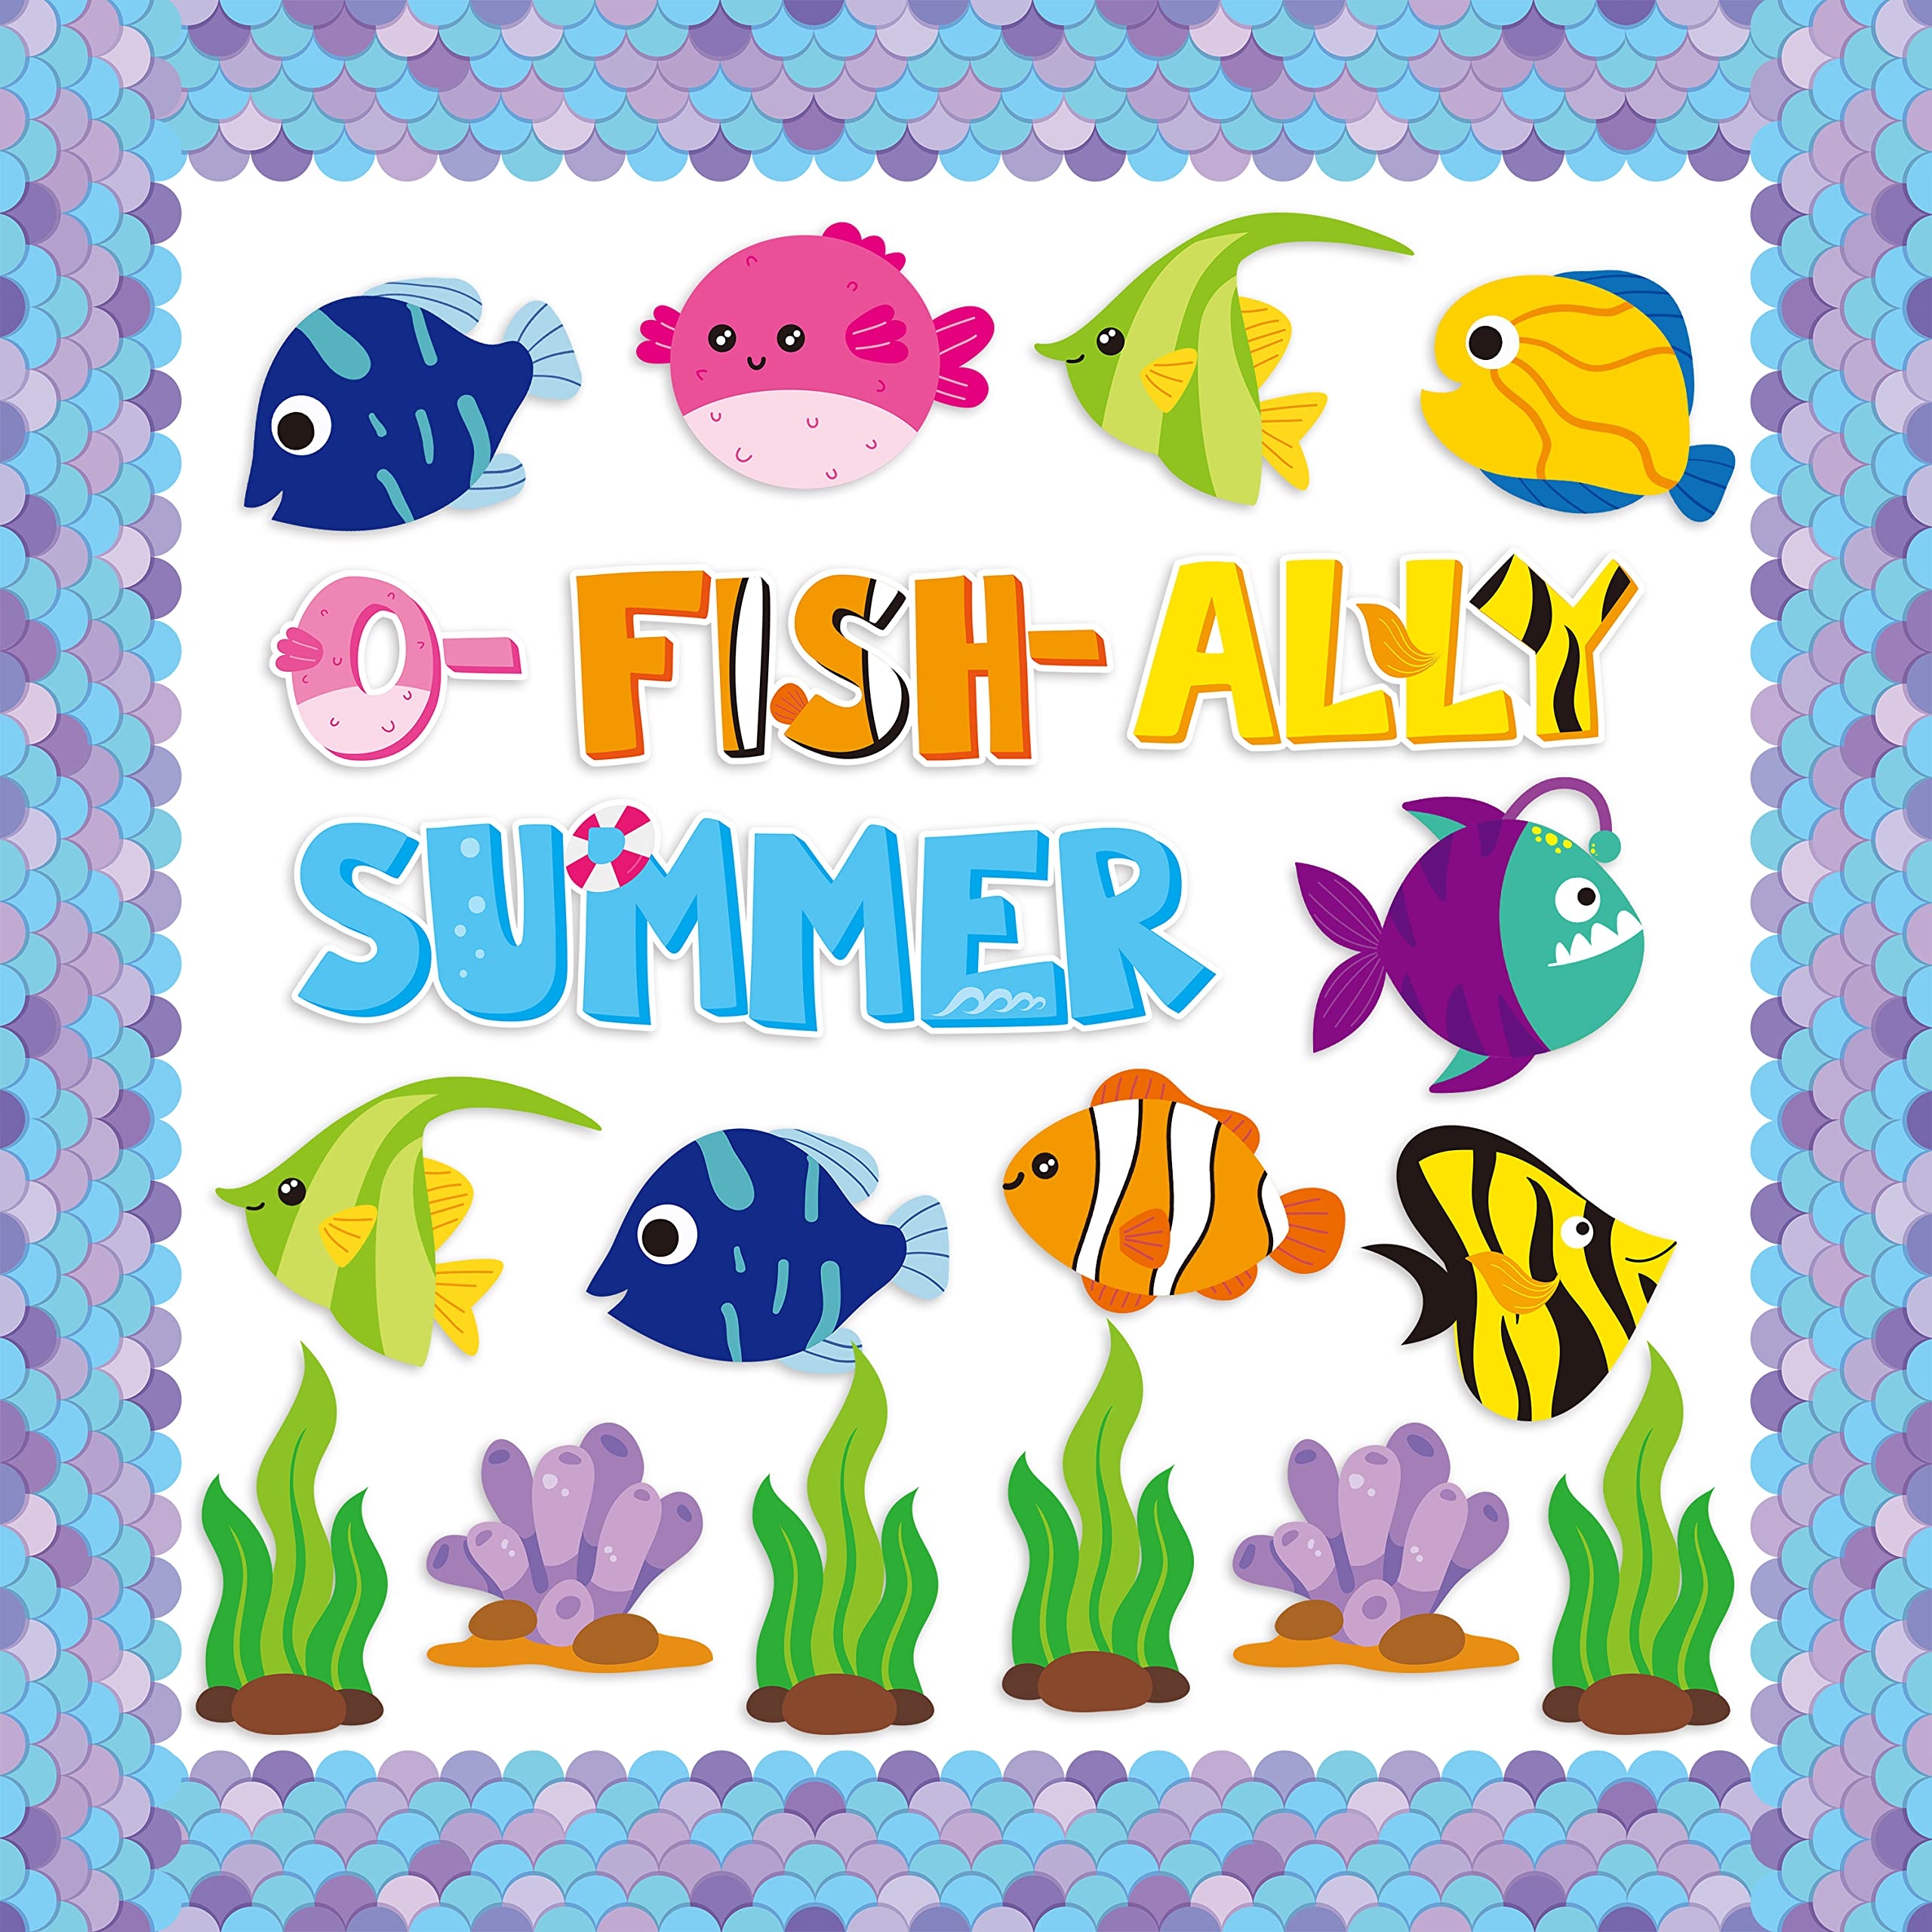 Amazon CY2SIDE 89PCS O Fish Ally Summer Cut Outs Decor For Classroom Bulletin Board Border Summer Tropical Fish Cut Outs Trim Borders School Summertime Cut Outs Under The Sea Bulletin Board Decorations Office Products